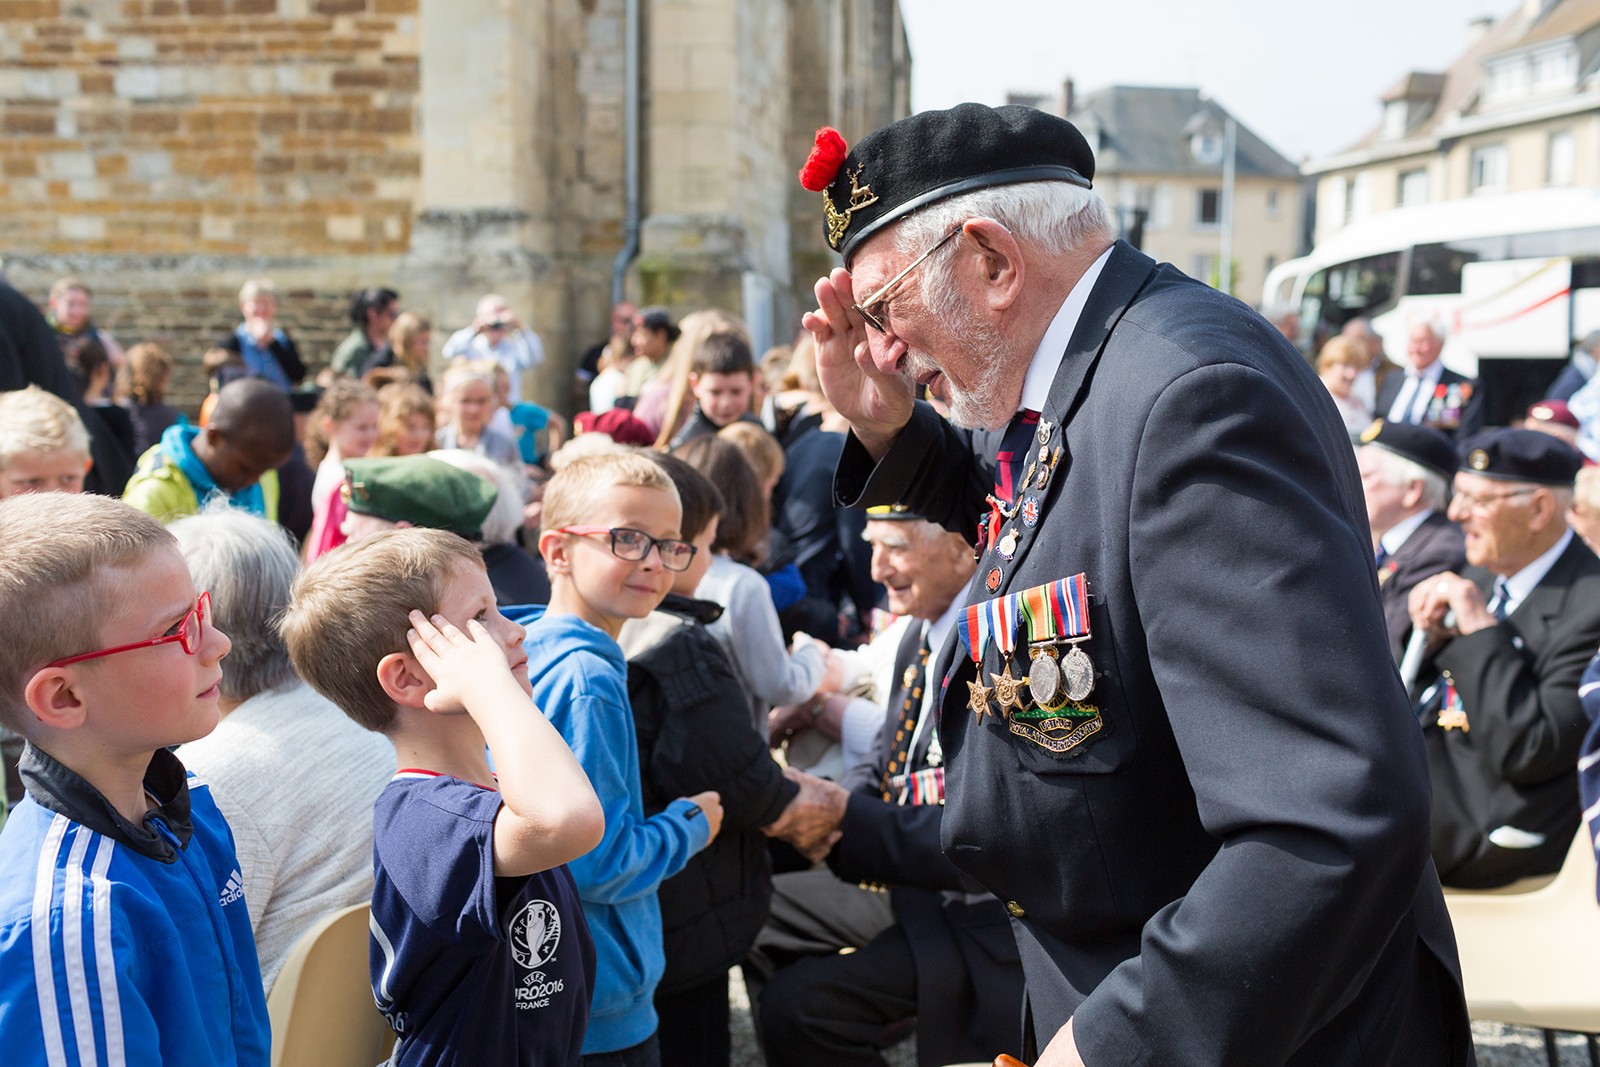 On the 80th anniversary of D-Day Cokebusters reflects on the lessons it has learned from the Normandy veterans.